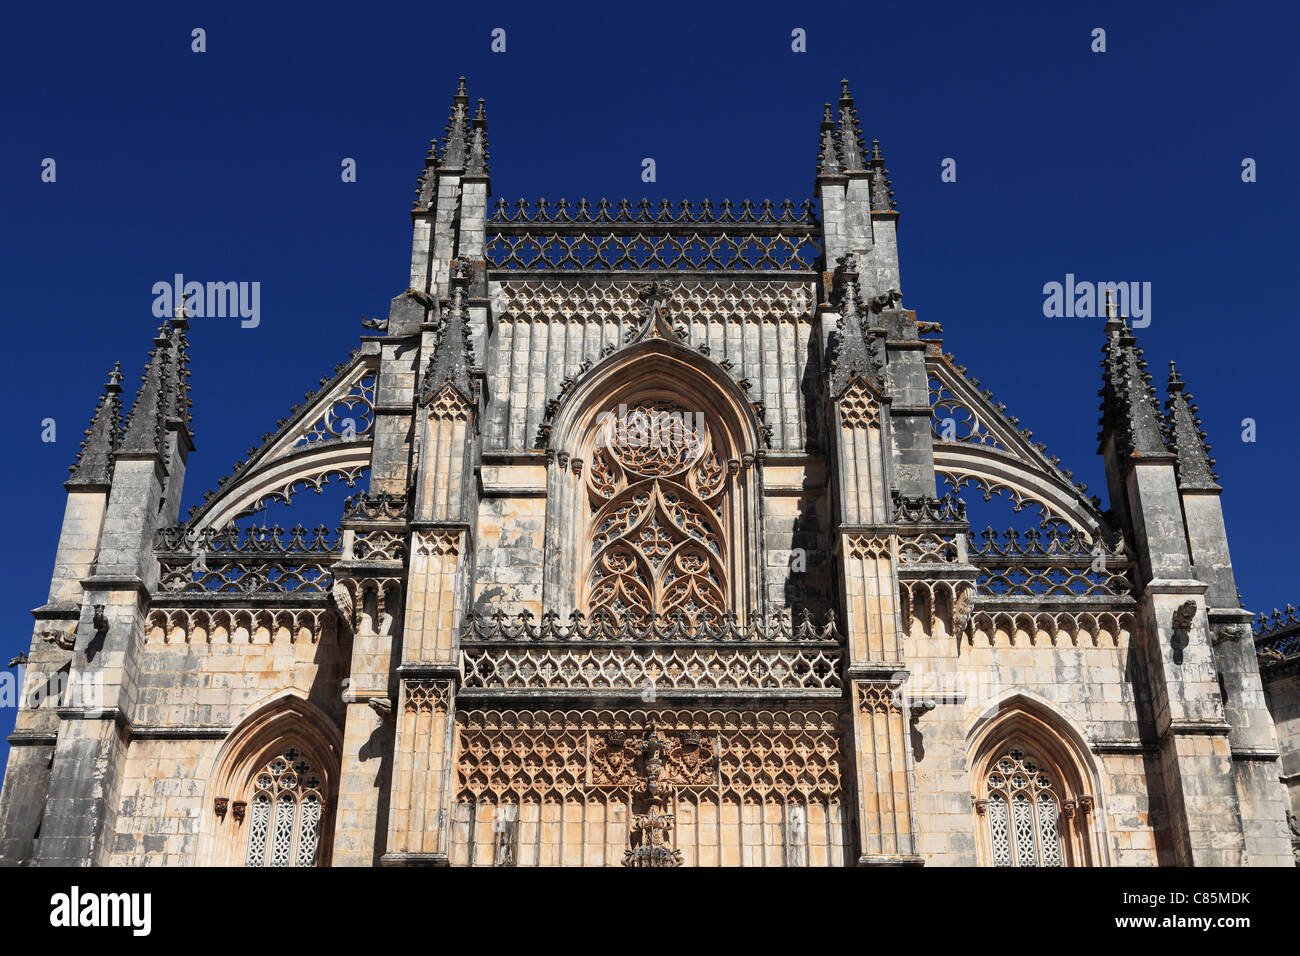 Architectural detail from Batalha Abbey in Batalha, Portugal. Stock Photo